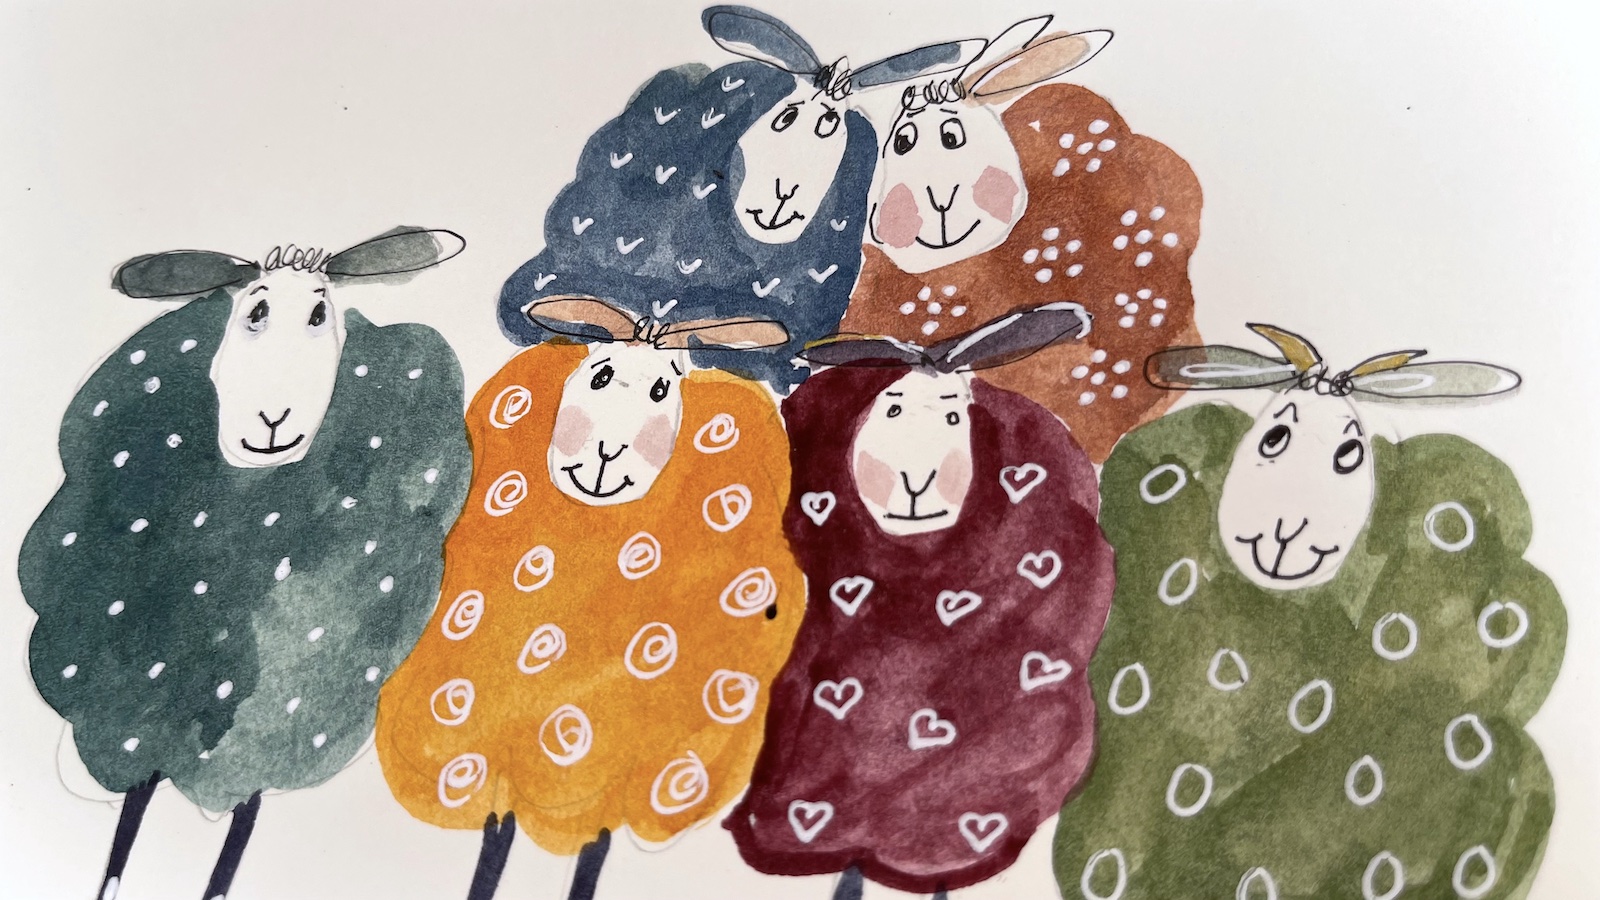 Whimsical Sheep for you to paint | Diane Antone Studio